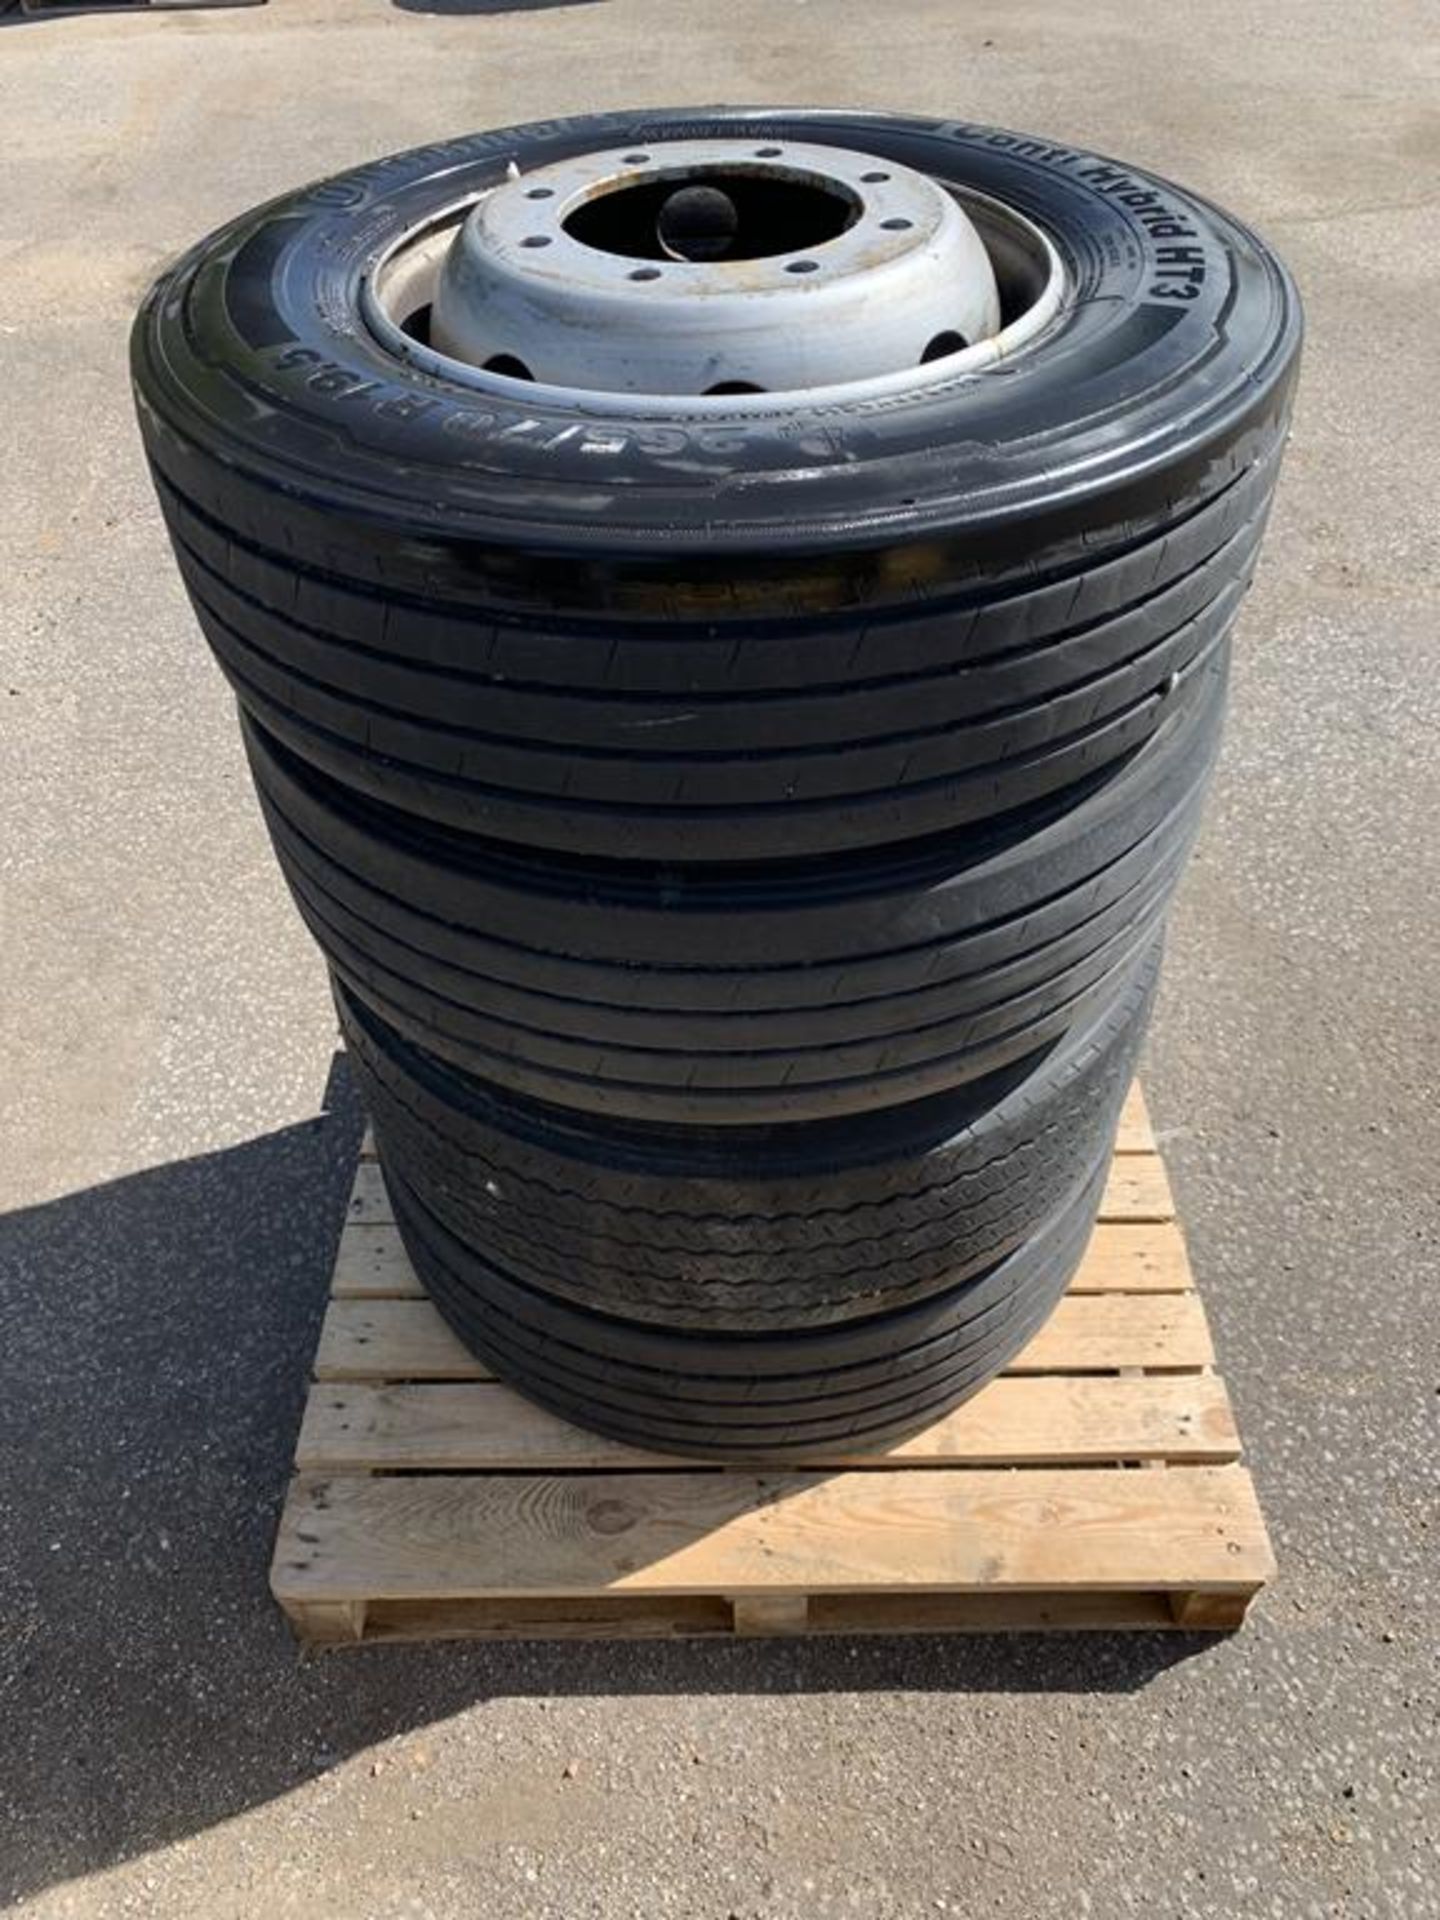 Wheel and tyres: Qty4 Continetal 265/70R19. Job Lot